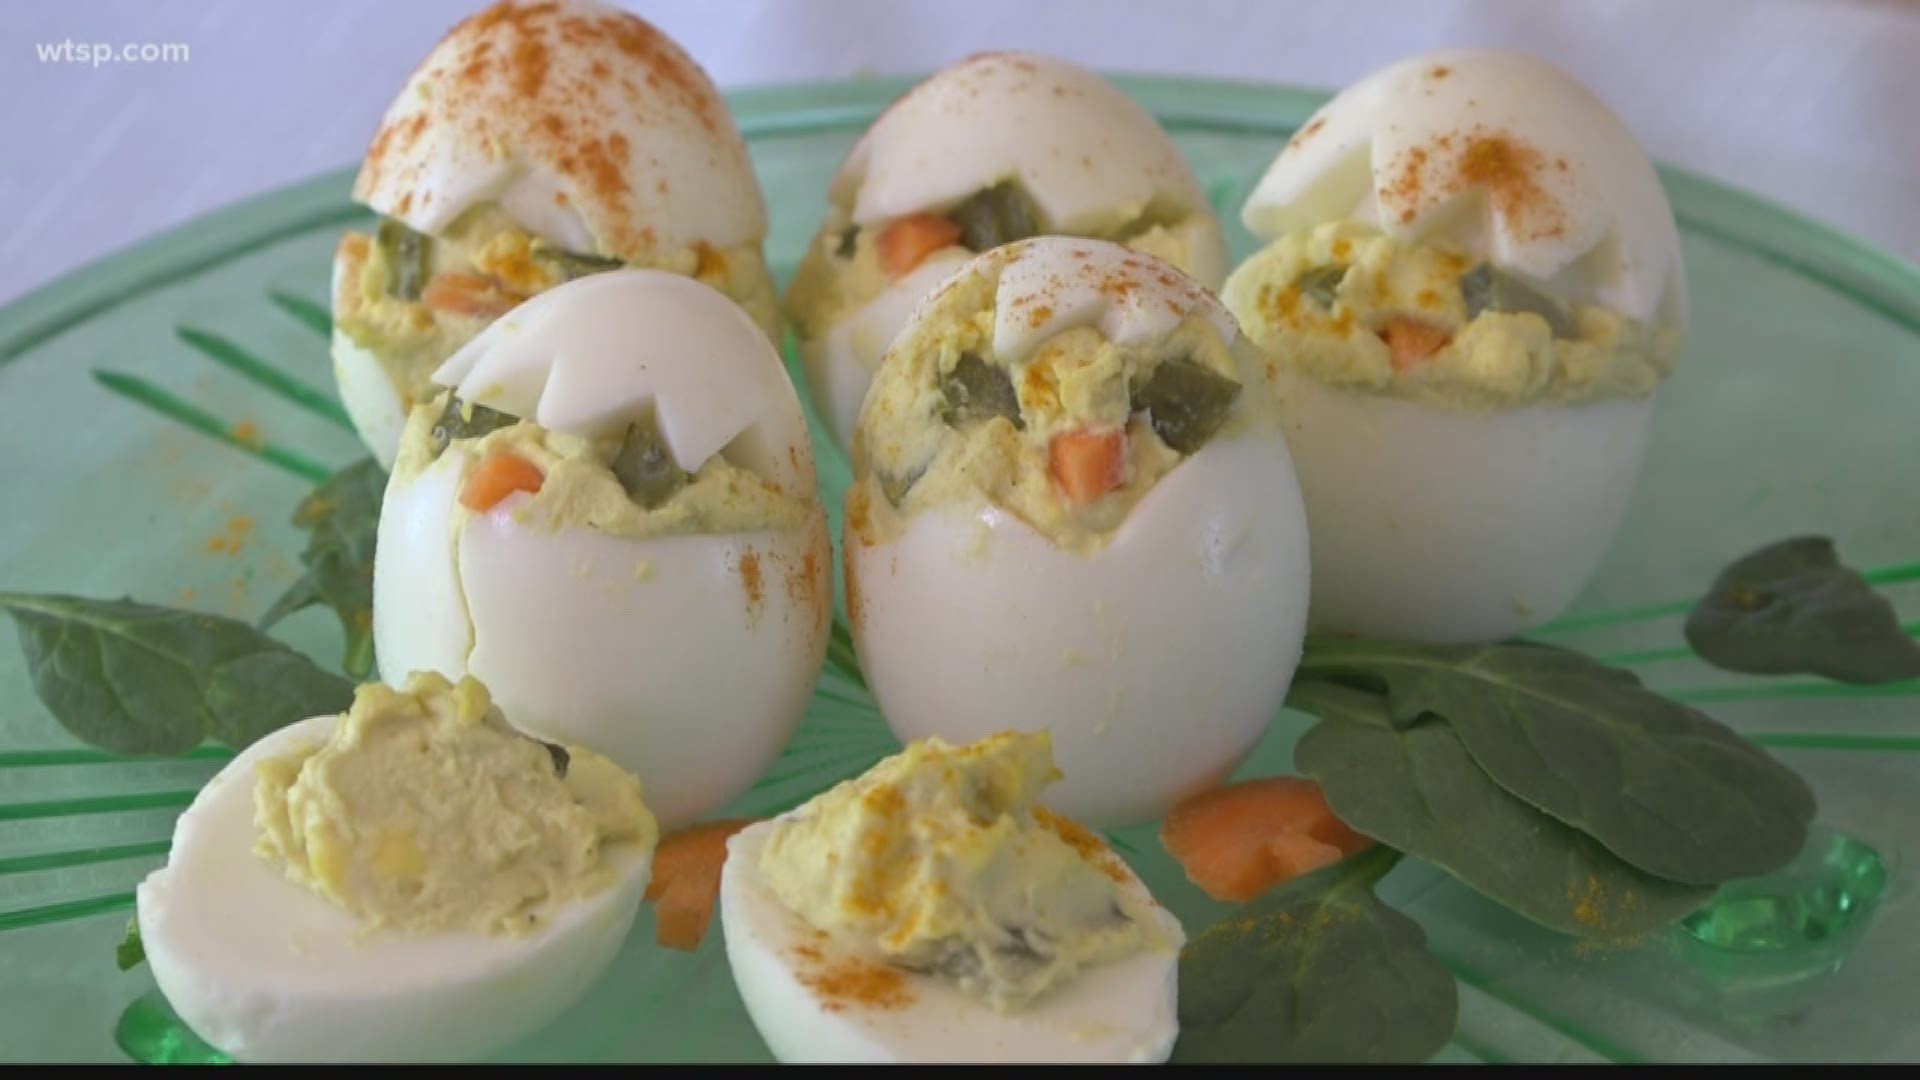 How to make creative deviled eggs, a veggie hummus garden and tips for a thrifty Easter tablescape.